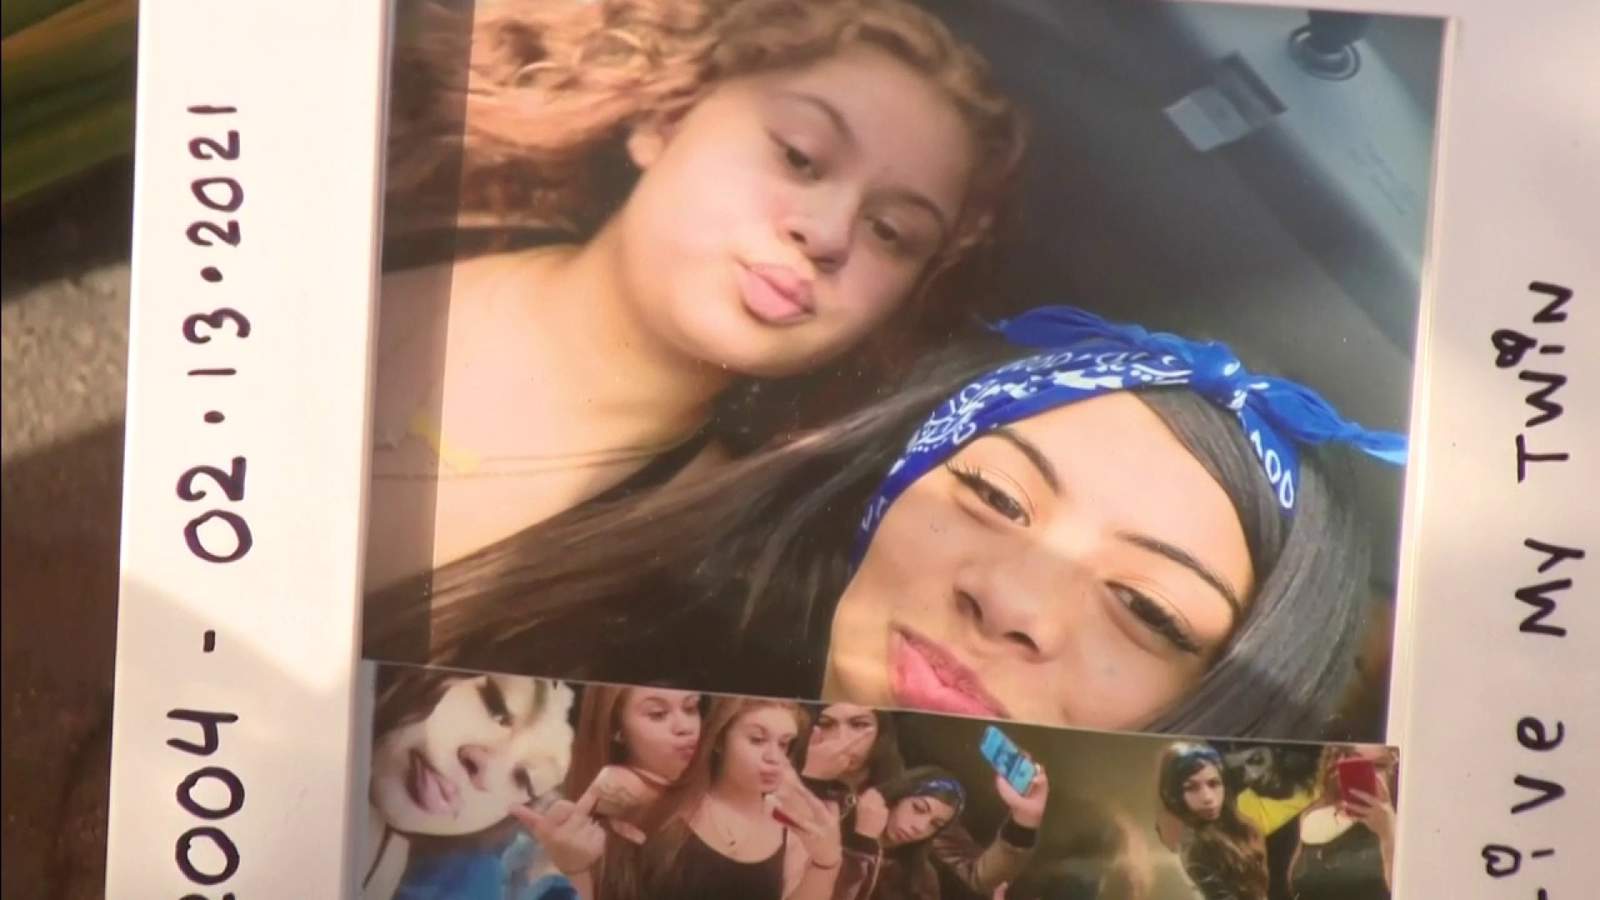 ‘I have to get justice for my kid,’ grieving father says after crash kills 2 teenage girls